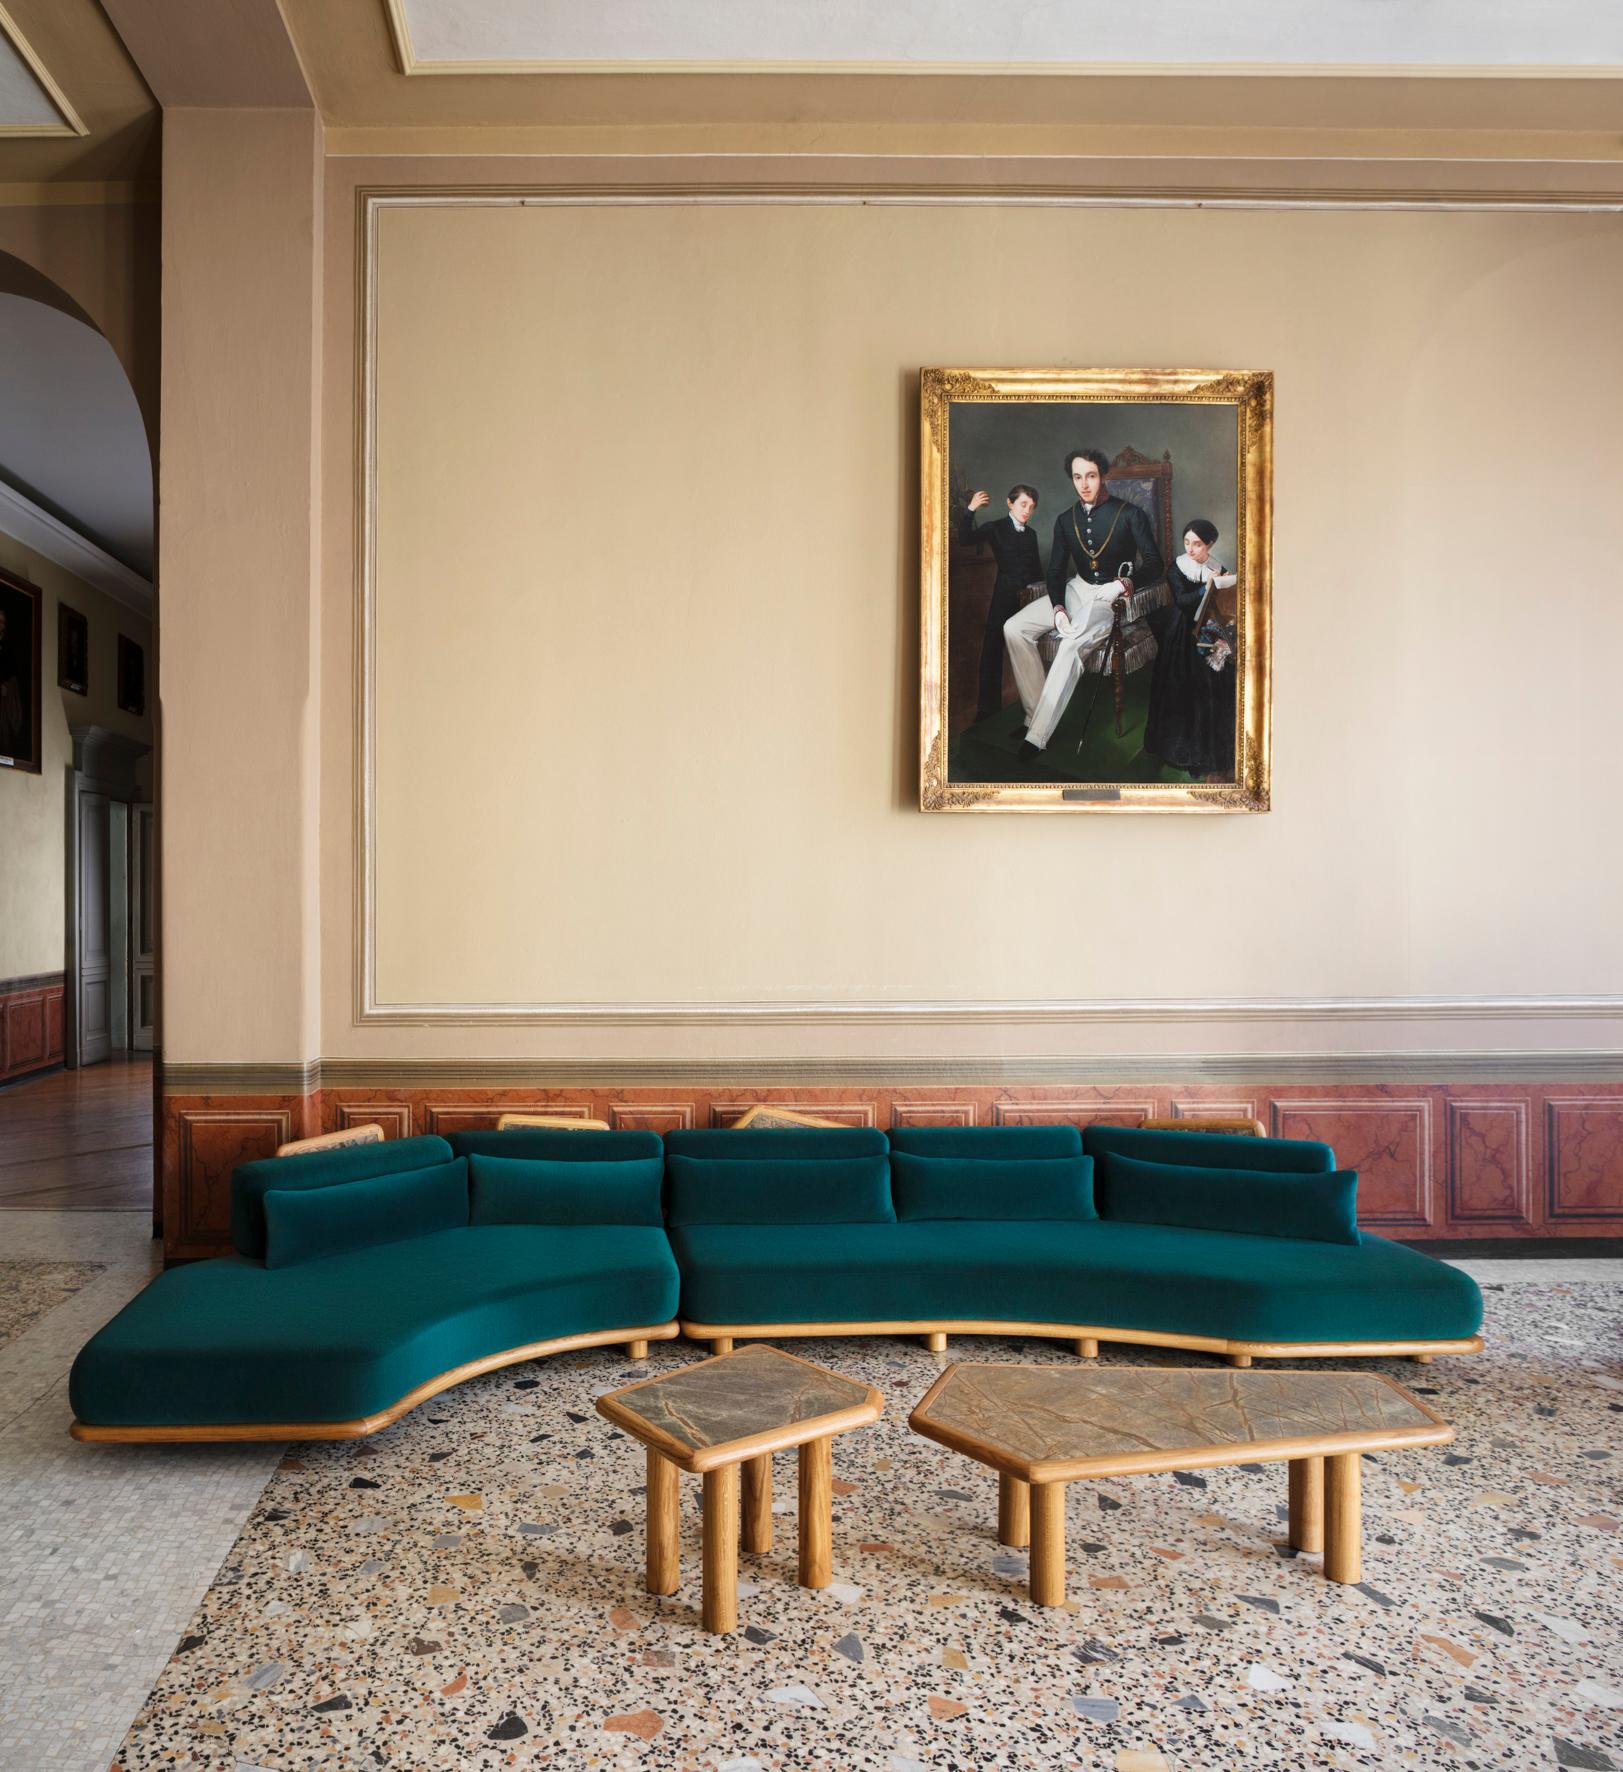 Thomas Grey Sofa is upholstered in a Kvadrat green velvet, base in solid oak, back panels in oak frame and Green Forest marble, cushions are in polyurethane foam, additional lumbar pillows in down feathers, internal frame in poplar wood.